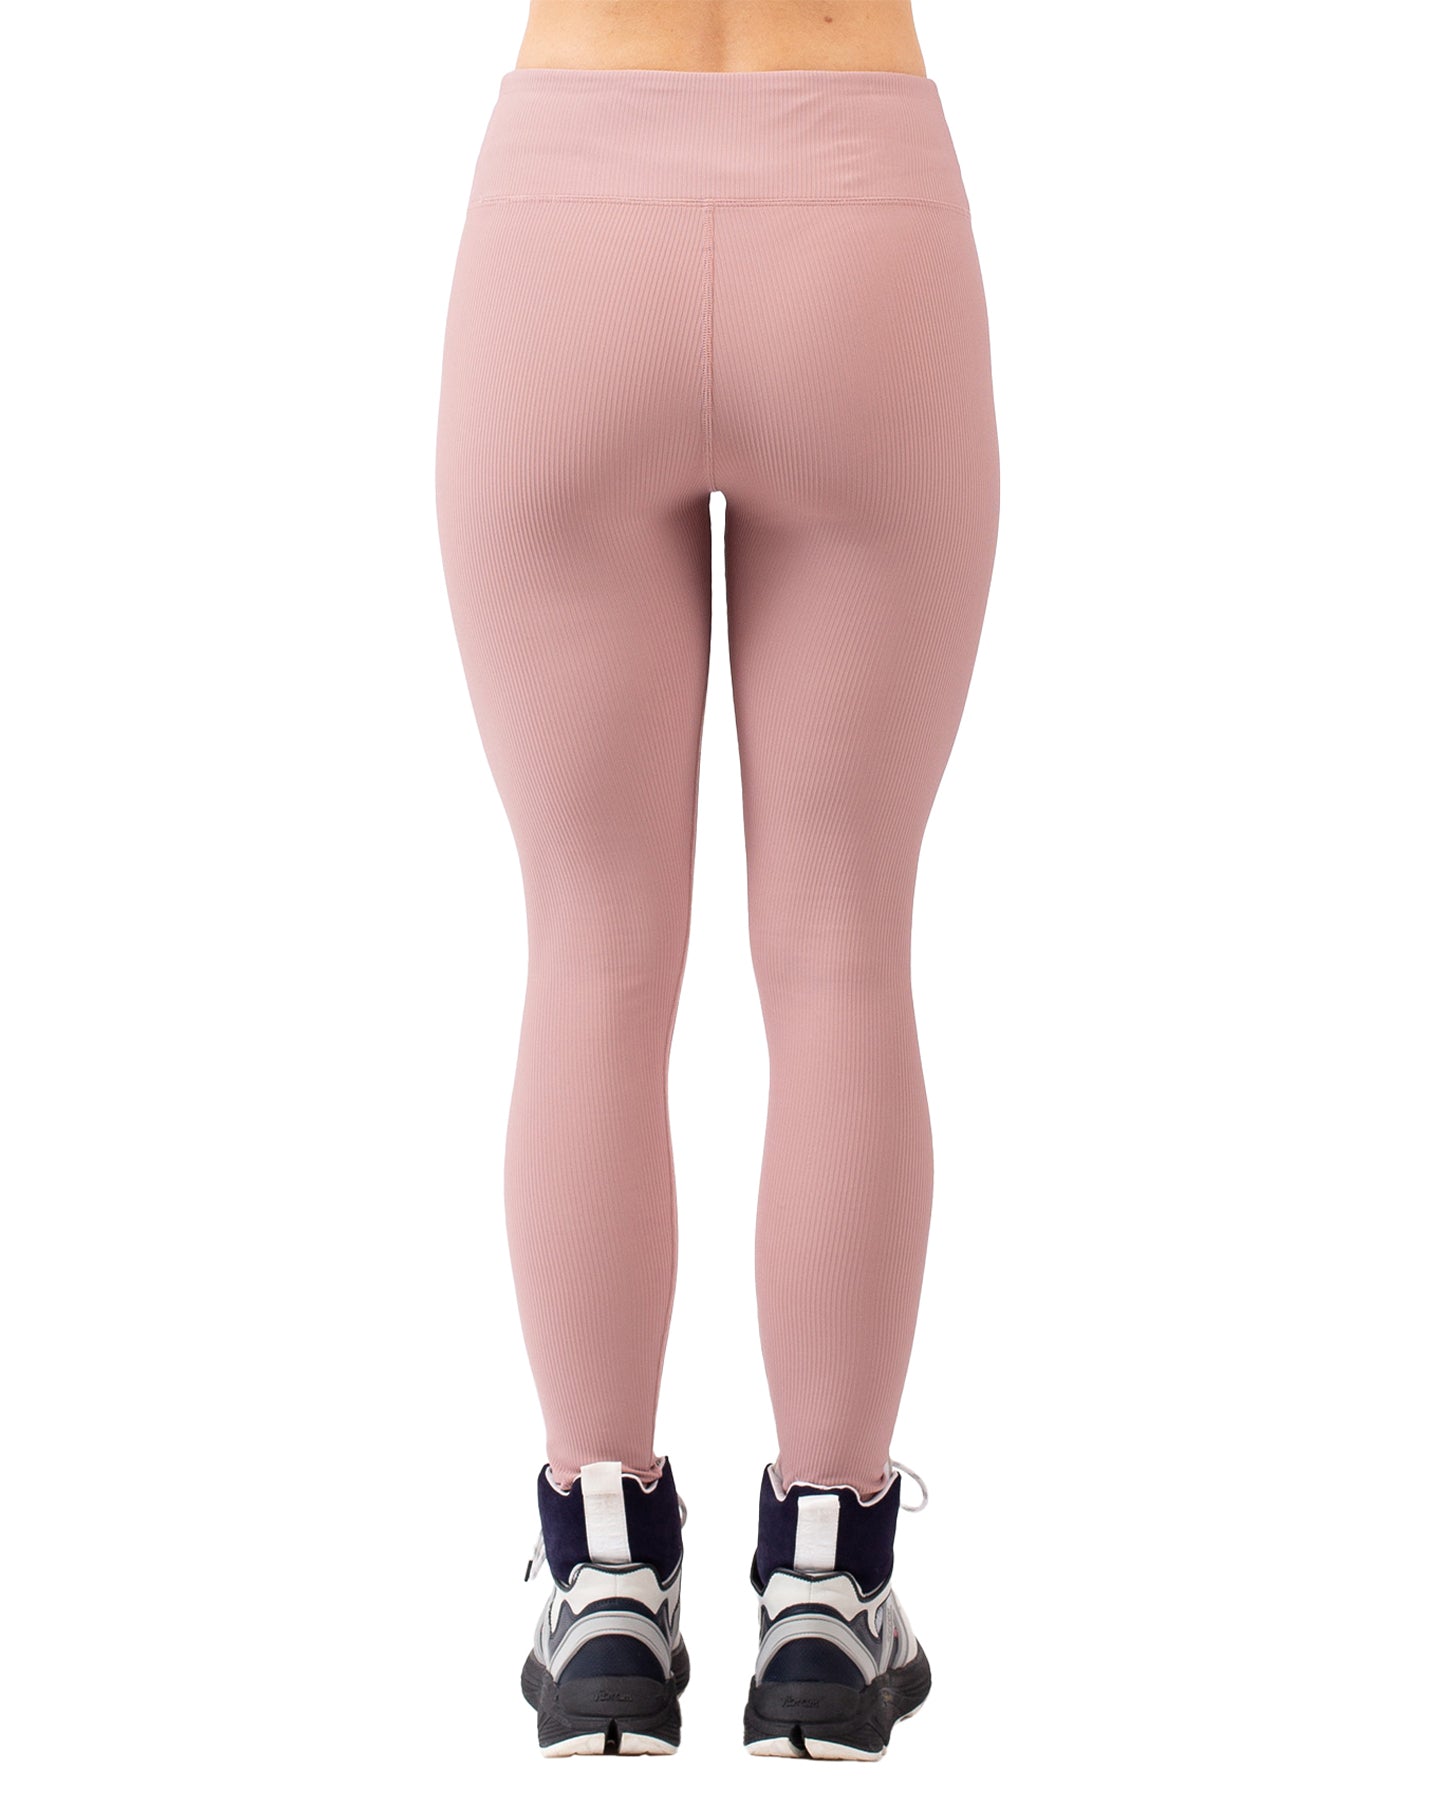 Eivy Icecold Rib Women's Tights - Faded Woodrose Women's Thermals - SnowSkiersWarehouse